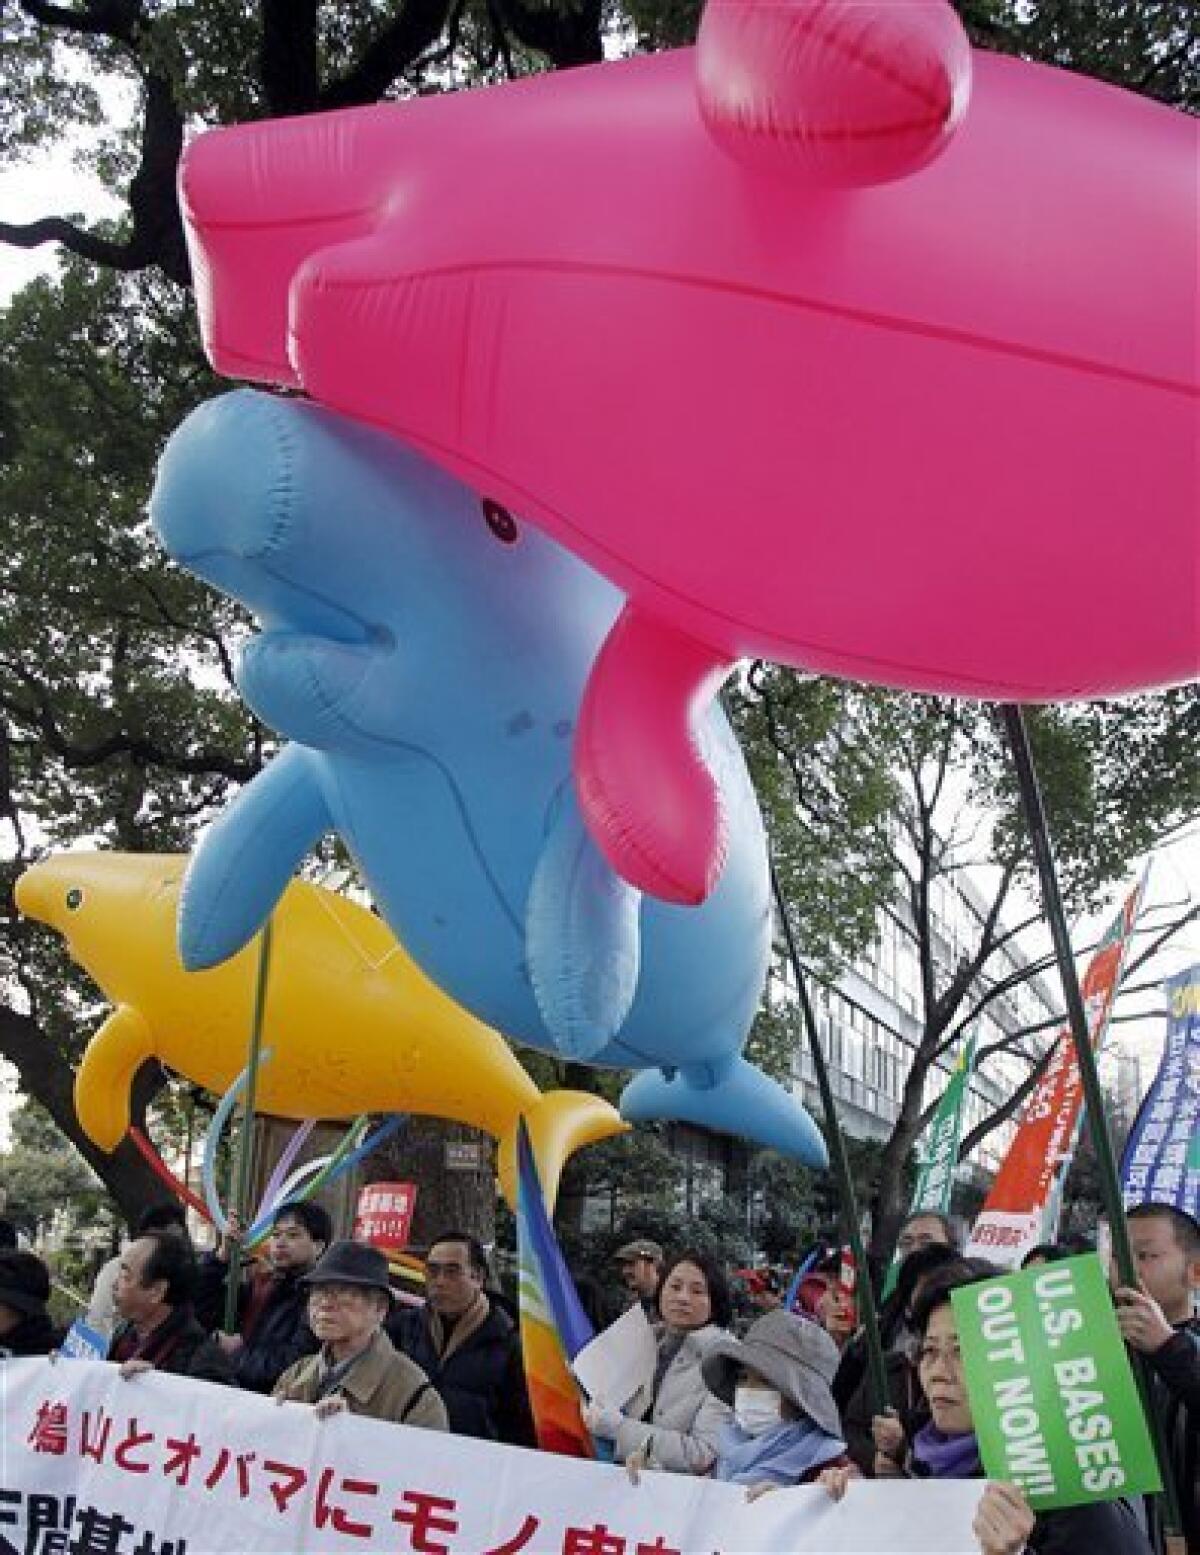 Demonstrators with balloons in the shape of dugong gather at a rally, protesting against relocation of a U.S. Marine base stationed on the southern island of Okinawa, in Tokyo Saturday, Jan. 30, 2010. Japanese Prime Minister Yukio Hatoyama said Friday he would decide by the end of May on where to relocate the U.S. Marine Airfield Futenma in Okinawa that has strained ties between the nations. (AP Photo/Koji Sasahara)